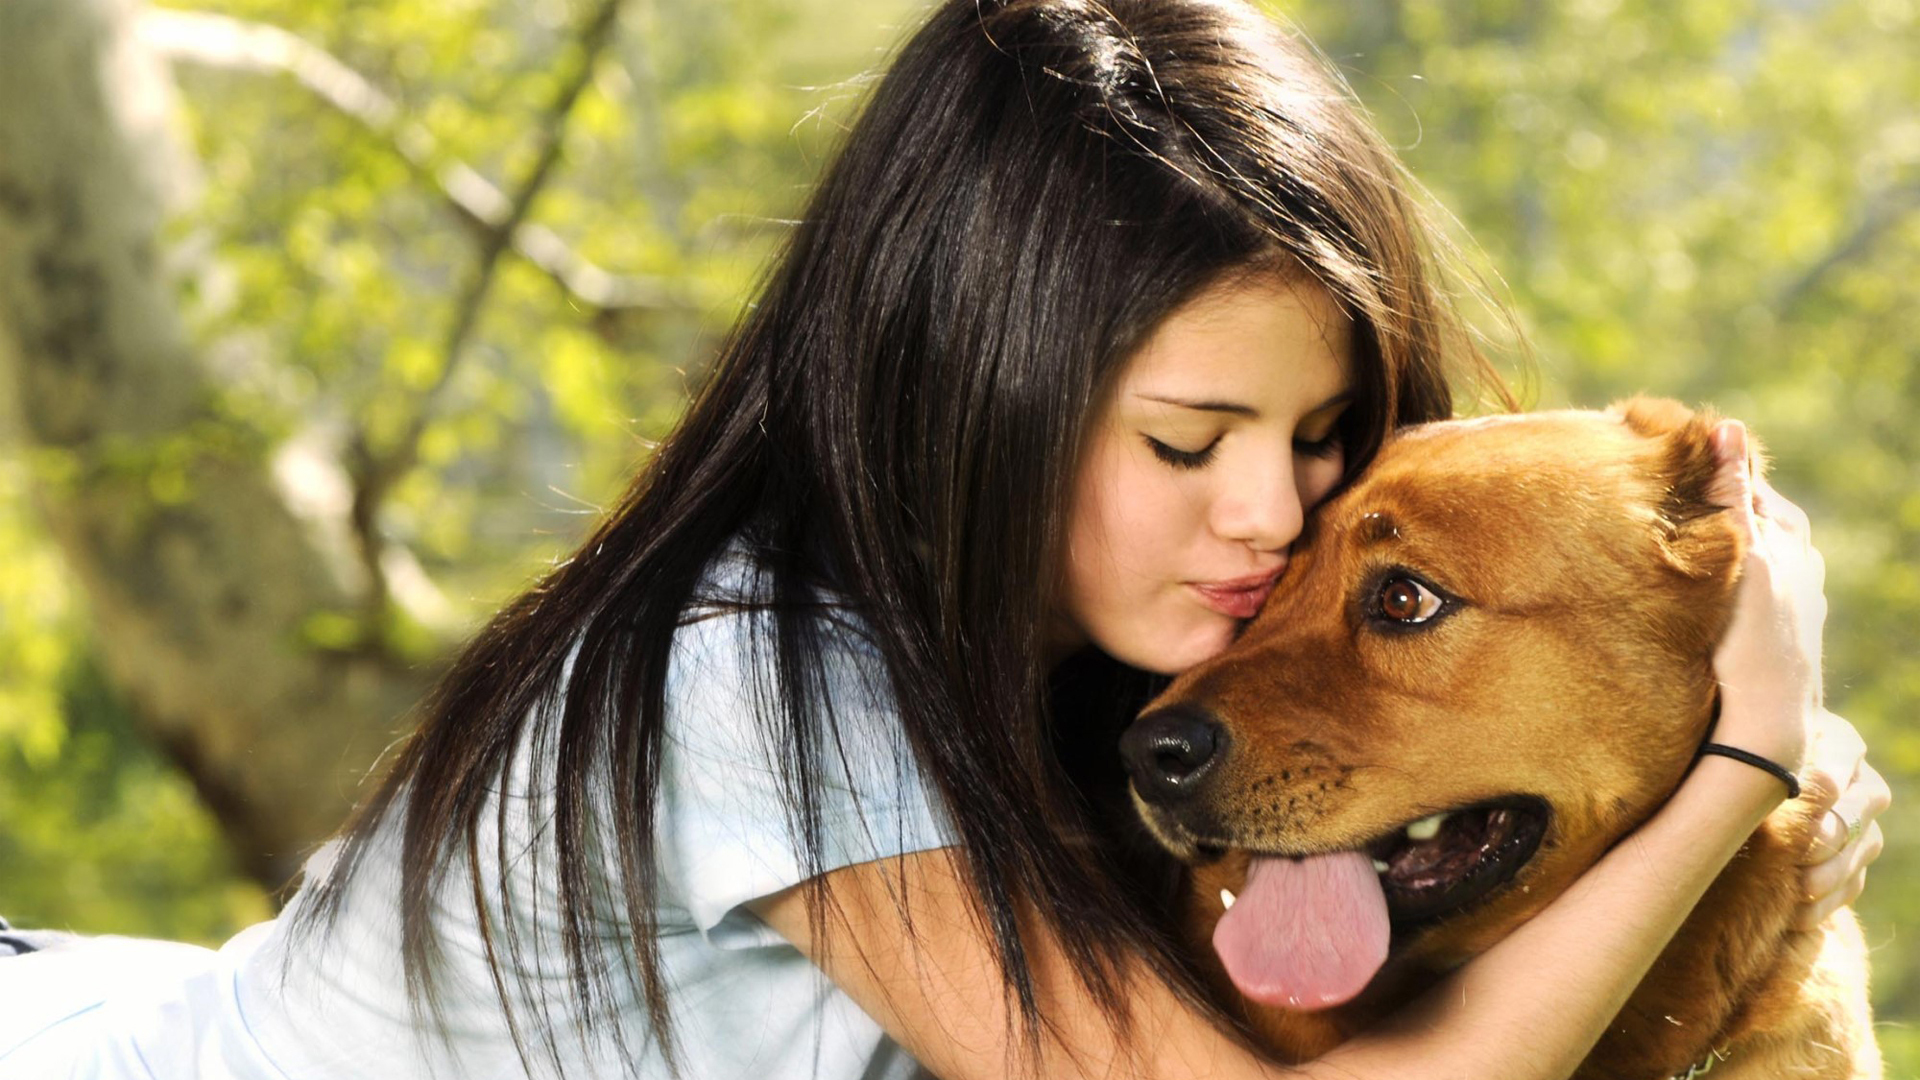 Amazing Selena Gomez Lovely Still With Dog Background Mobile Desktop Free Hd Pictures